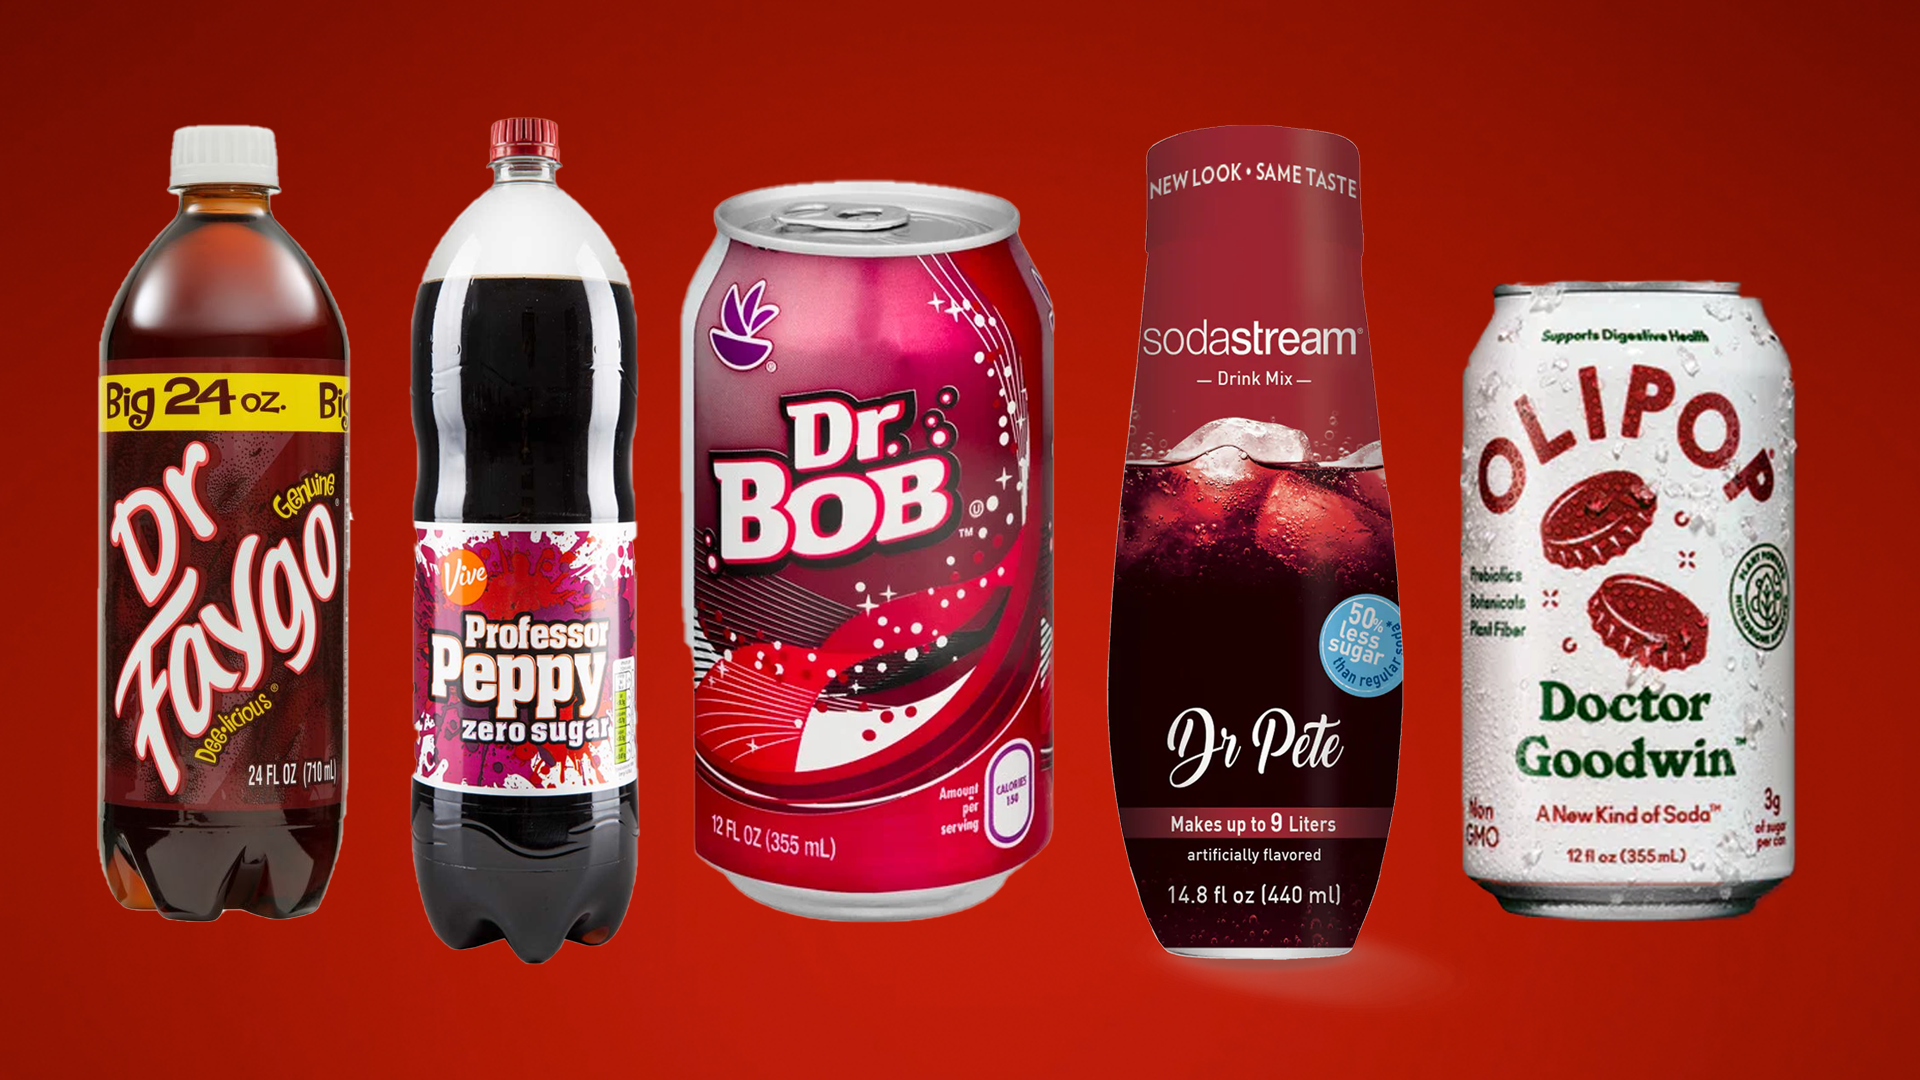 Take A Trip Through The Pepper-Verse With These Alternatives To The Good Doctor